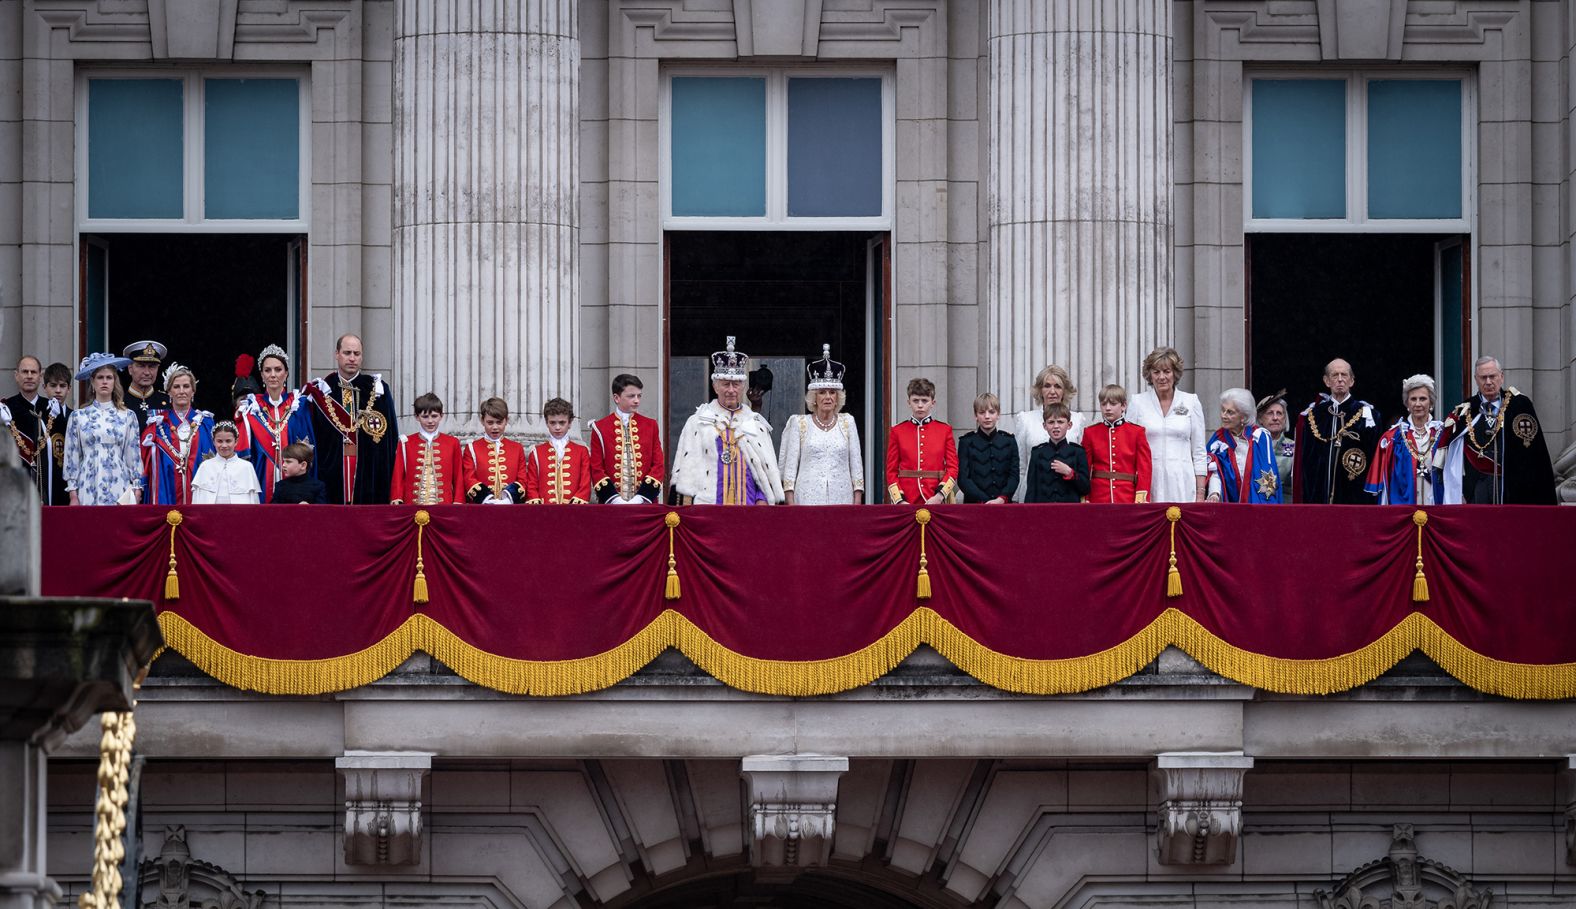 The King and Queen appear on the Buckingham Palace balcony with <a href="https://www.cnn.com/uk/live-news/king-charles-iii-coronation-ckc-intl-gbr/h_dcb973f7bd4018889eb1a3926ad669ad" target="_blank">various members of the royal family</a> following their coronation.